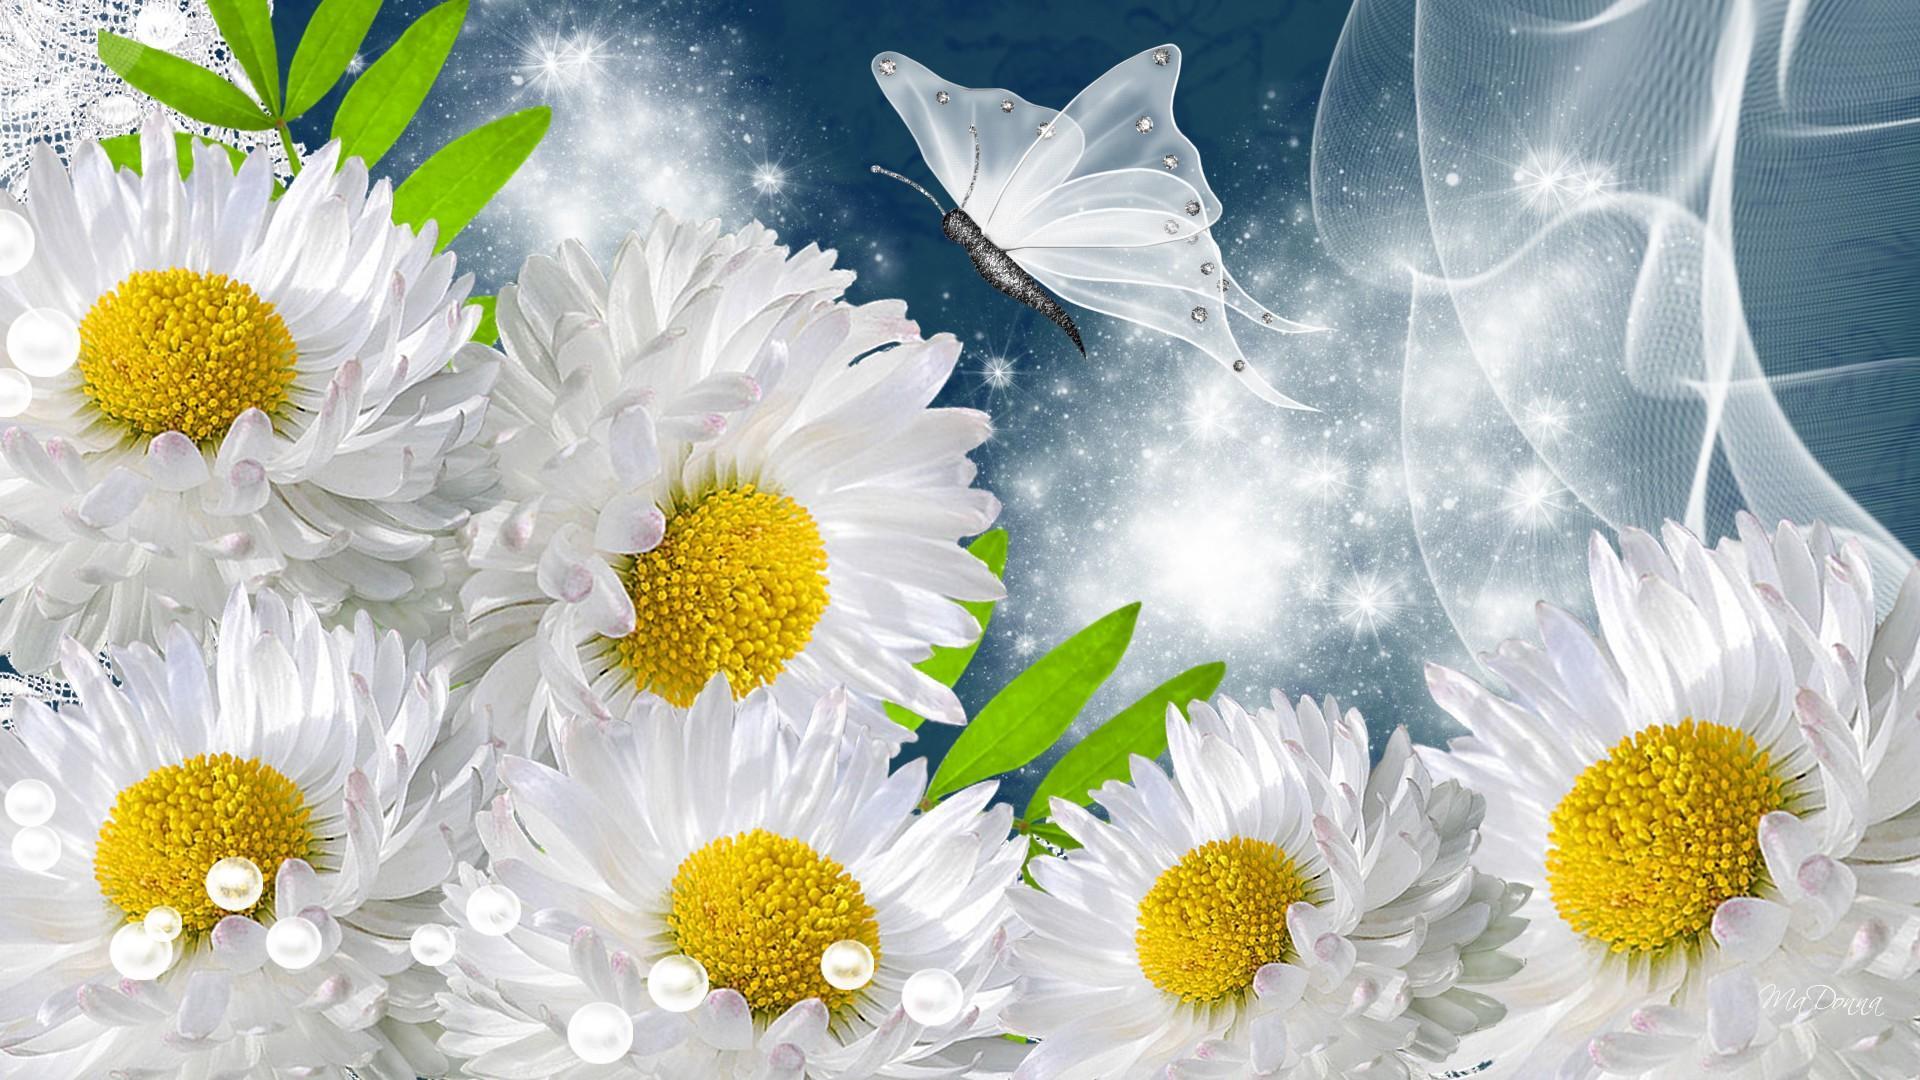 W/ John Perez wallpaper. Butterfly and daisies